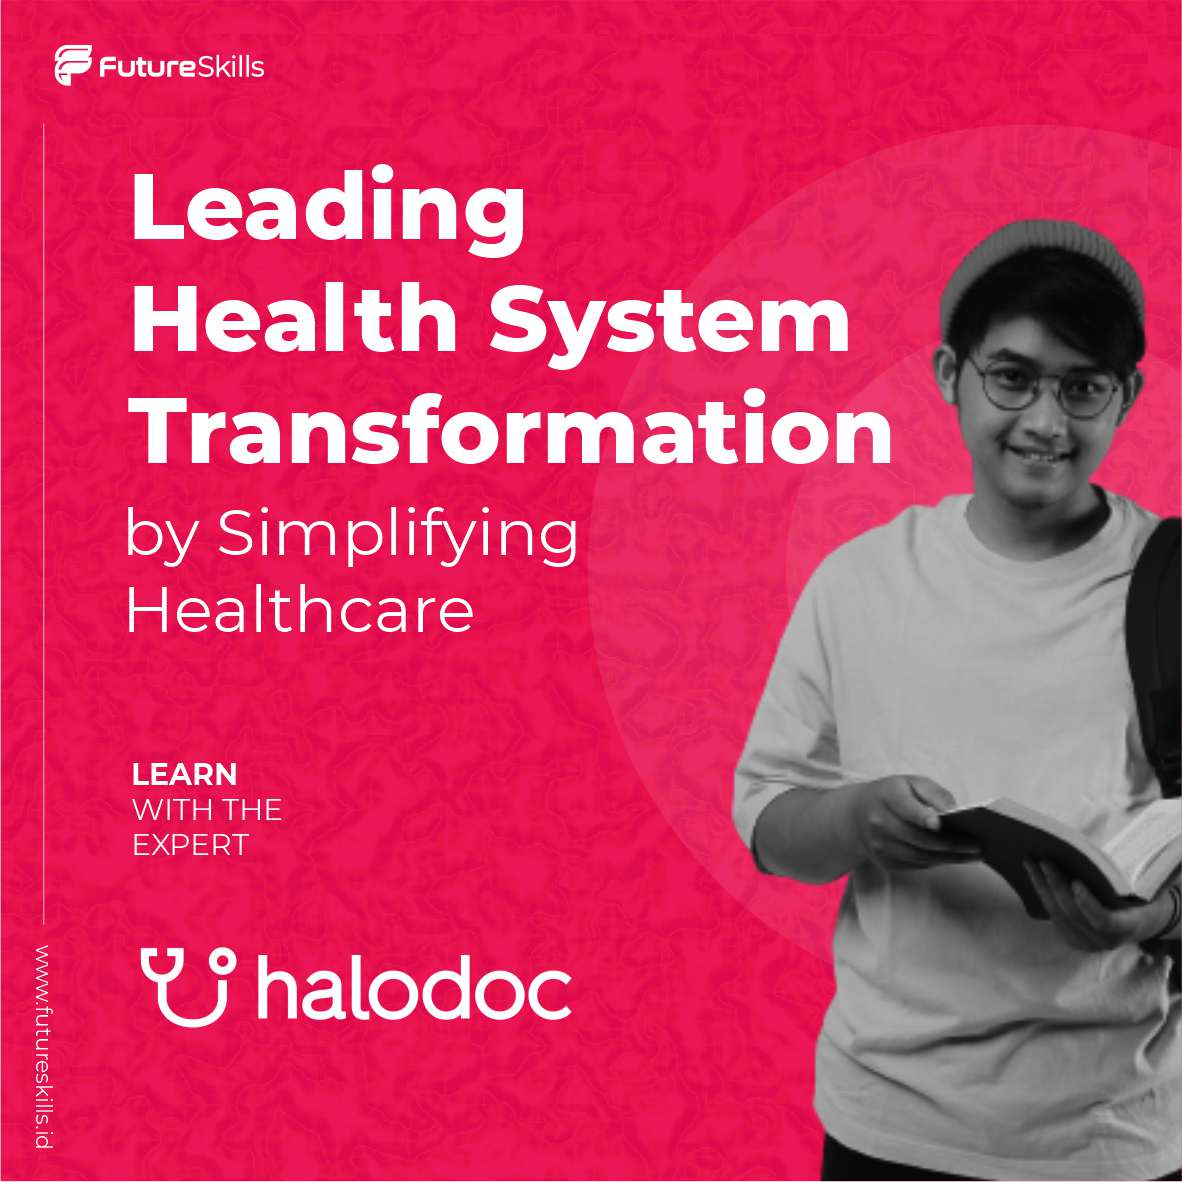 Leading Health System Transformation by Simplifying Healthcare